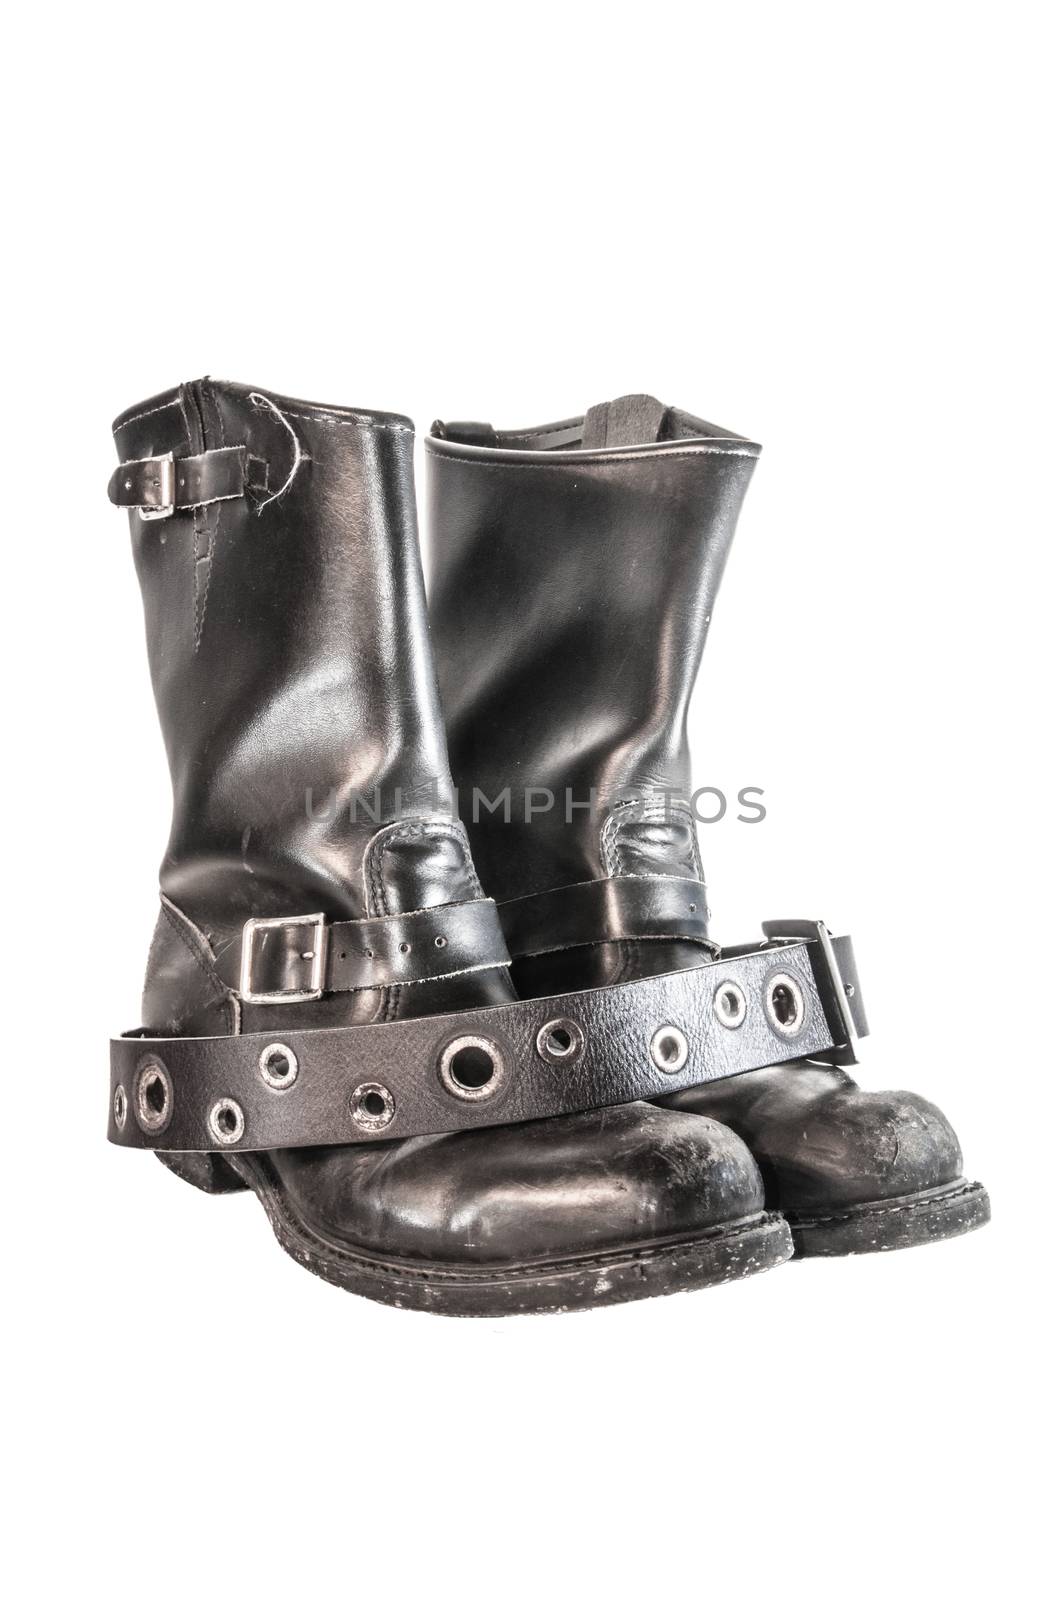 Black leather biker boots and belt isolated over white